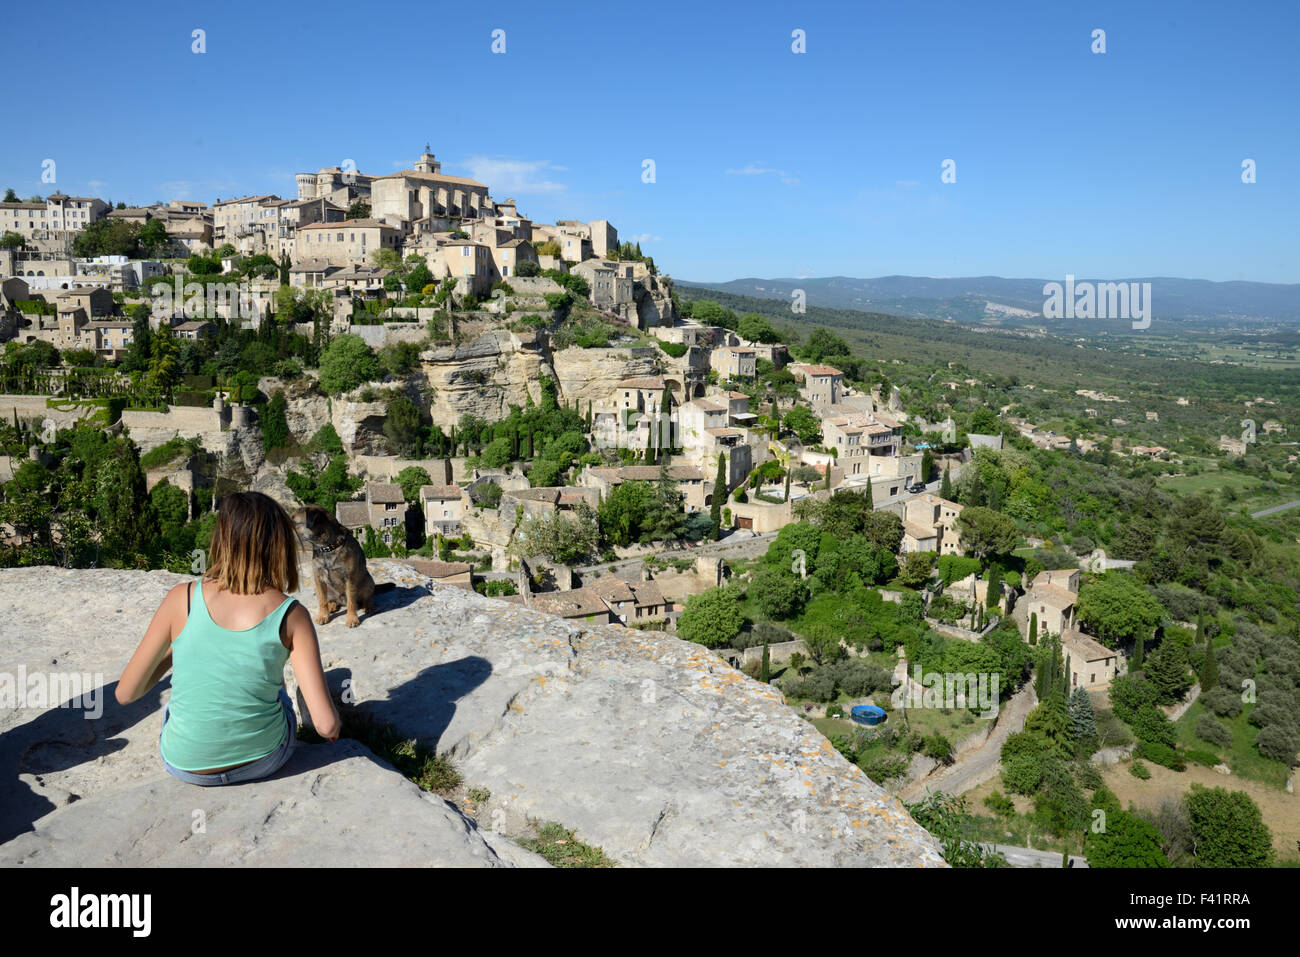 Girl or Young Woman Female Tourist Enjoys the View over the Hilltop Village of Gordes in the Luberon Regional Park Provence France Stock Photo